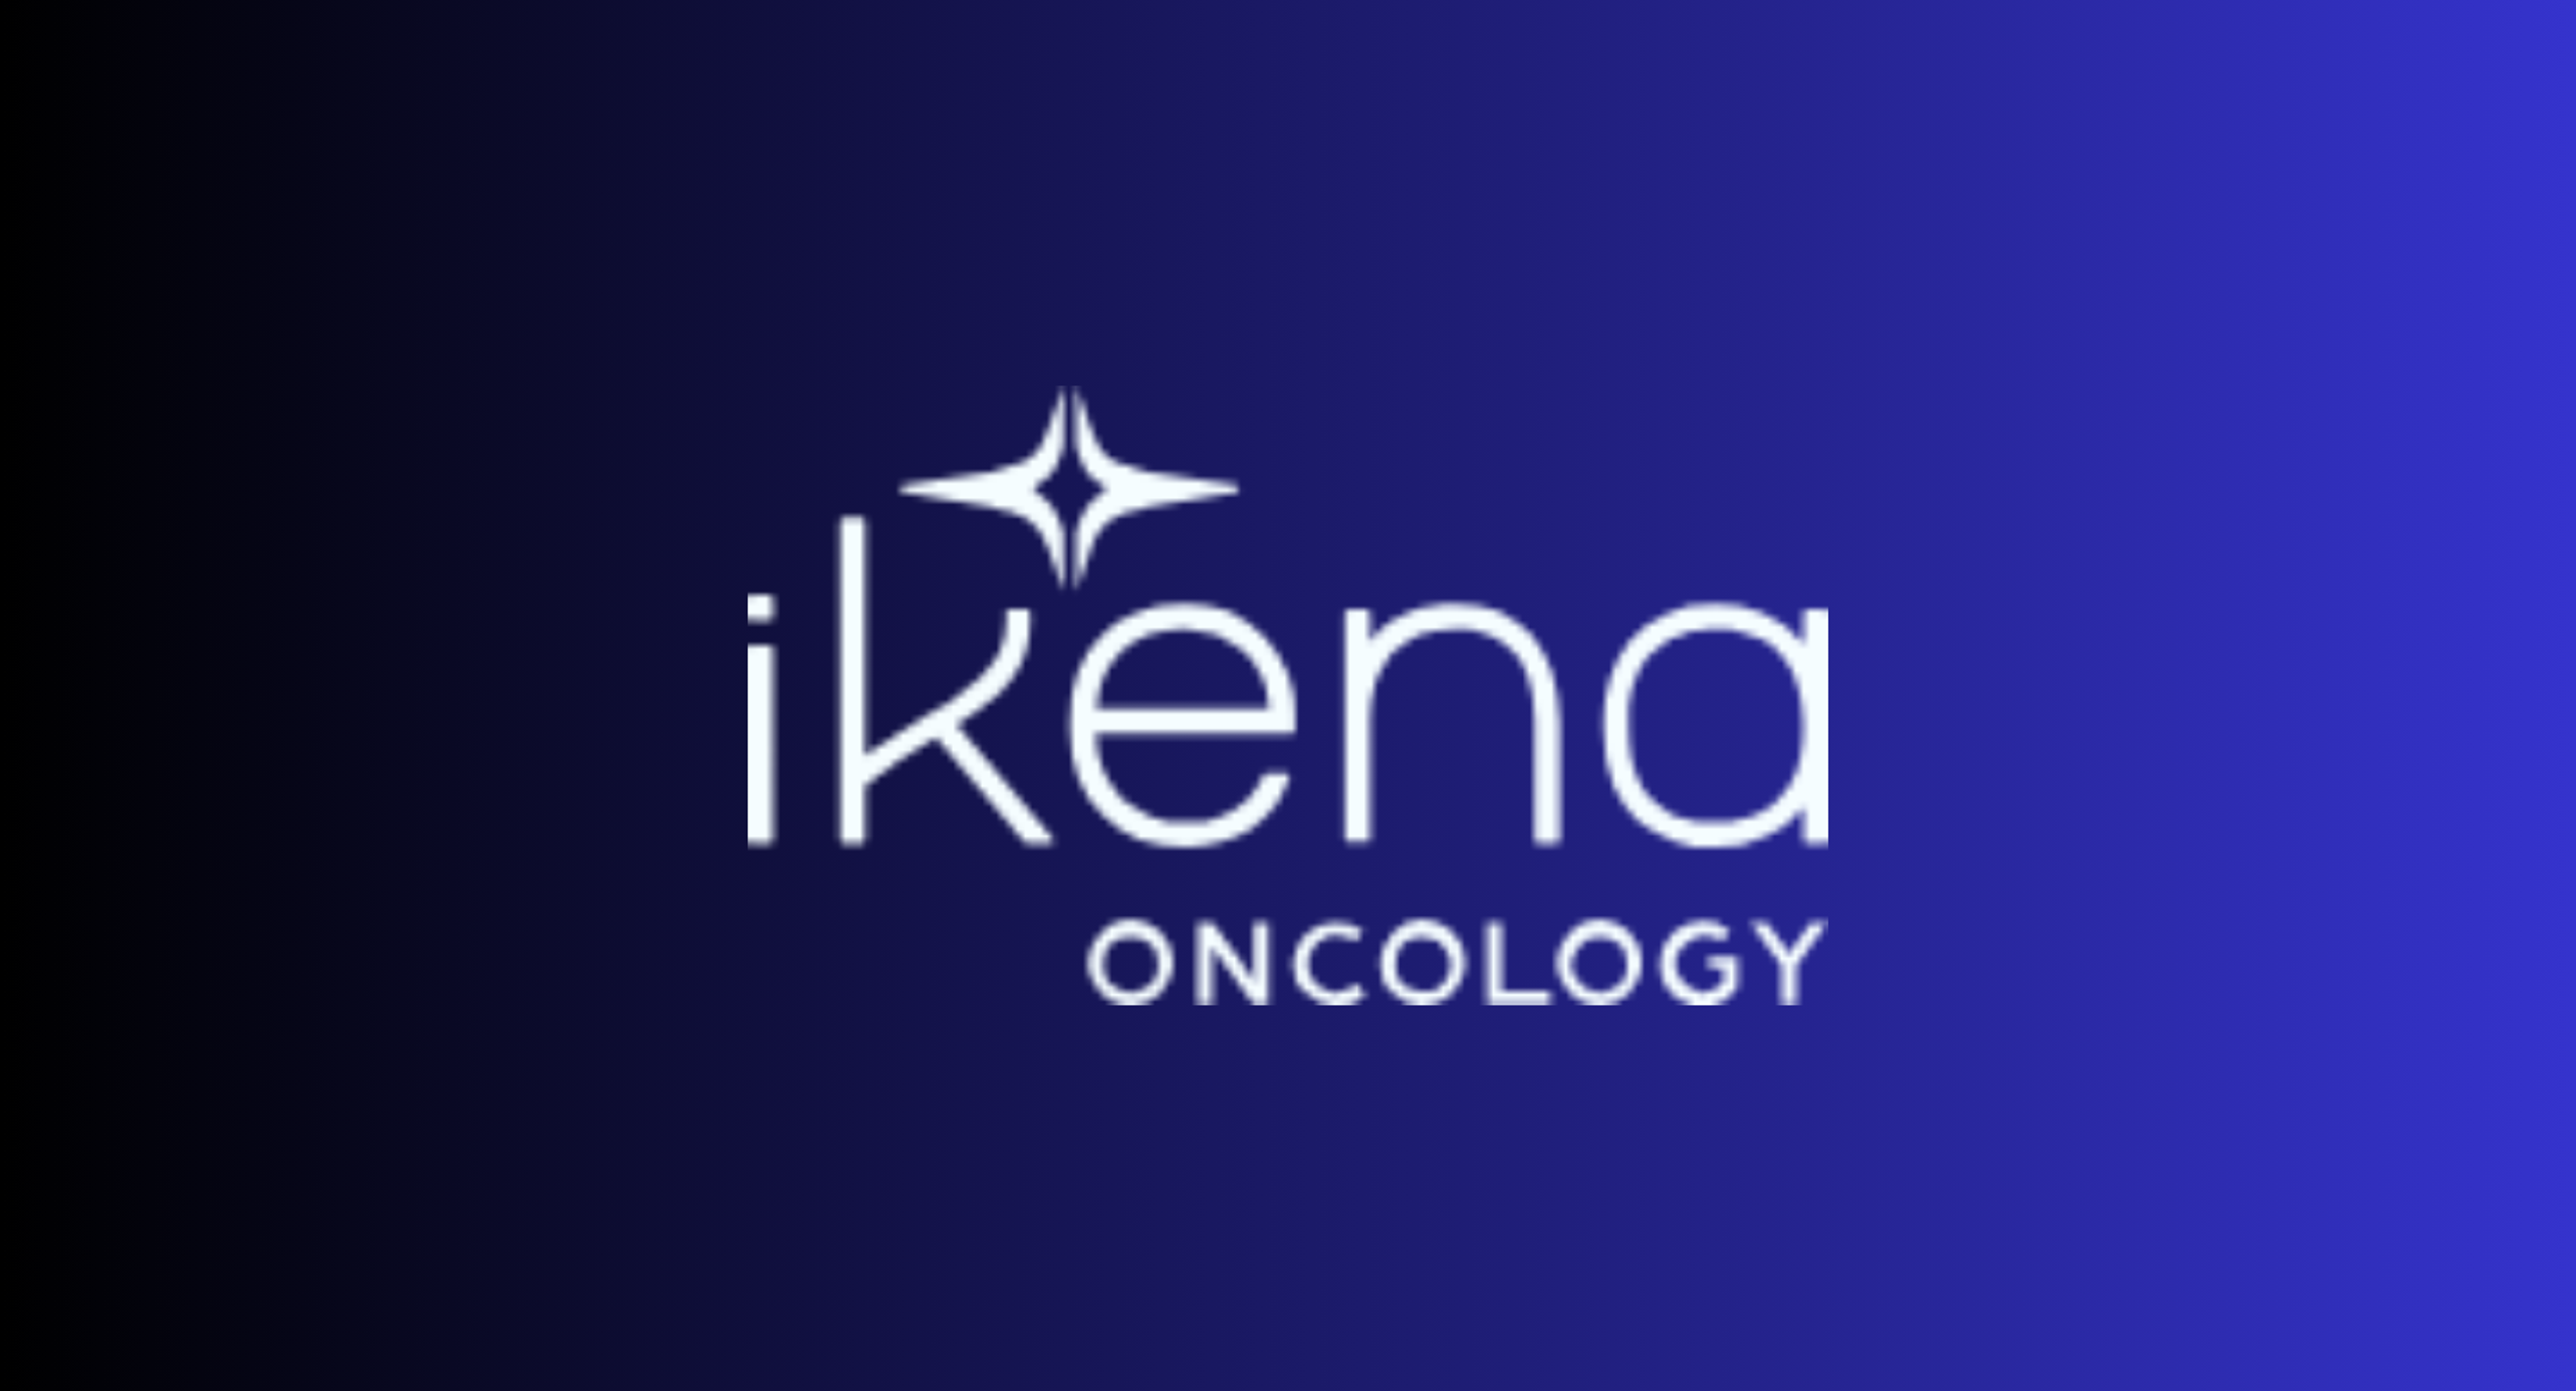 Optimism Surrounds Cancer Focused Ikena Oncology, Analyst Initiates With Outperform